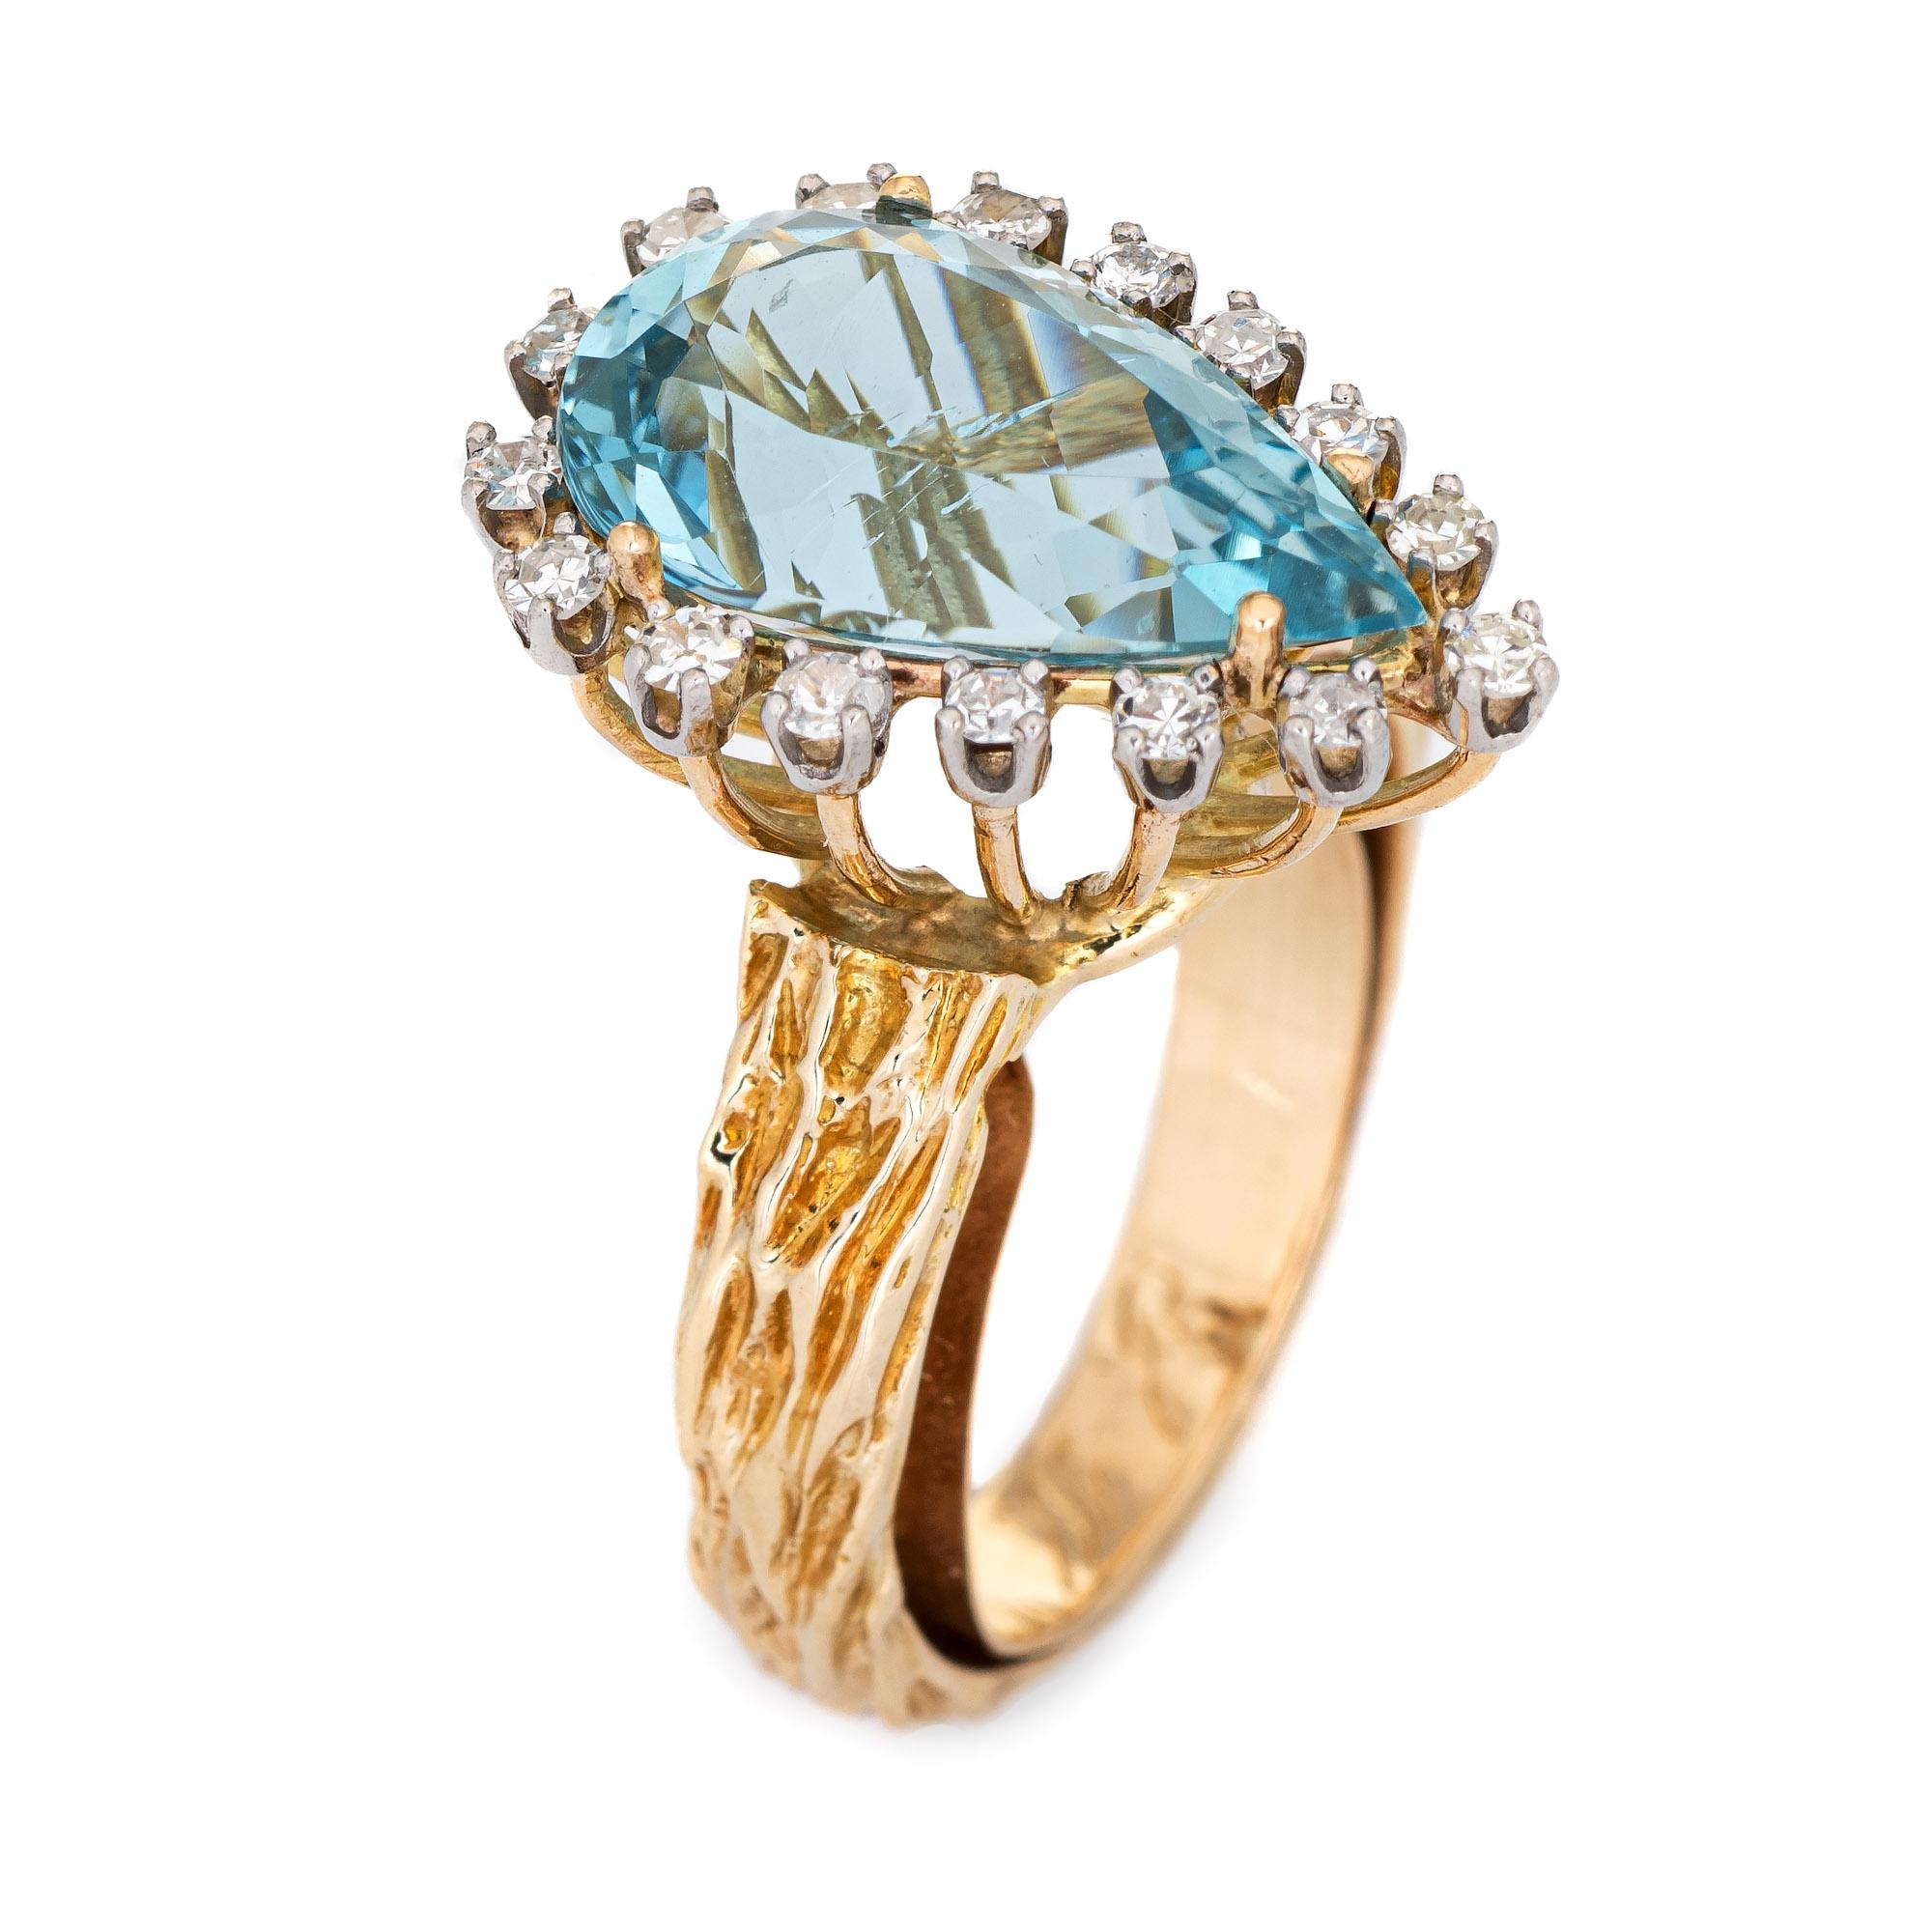 Stylish vintage aquamarine & diamond cocktail ring (circa 1960s to 1970s) crafted in 14 karat yellow gold. 

Pear cut aquamarine measures 15mm x 9mm (estimated at 5 carats), accented with 16 single cut diamonds that total an estimated 0.16 carats